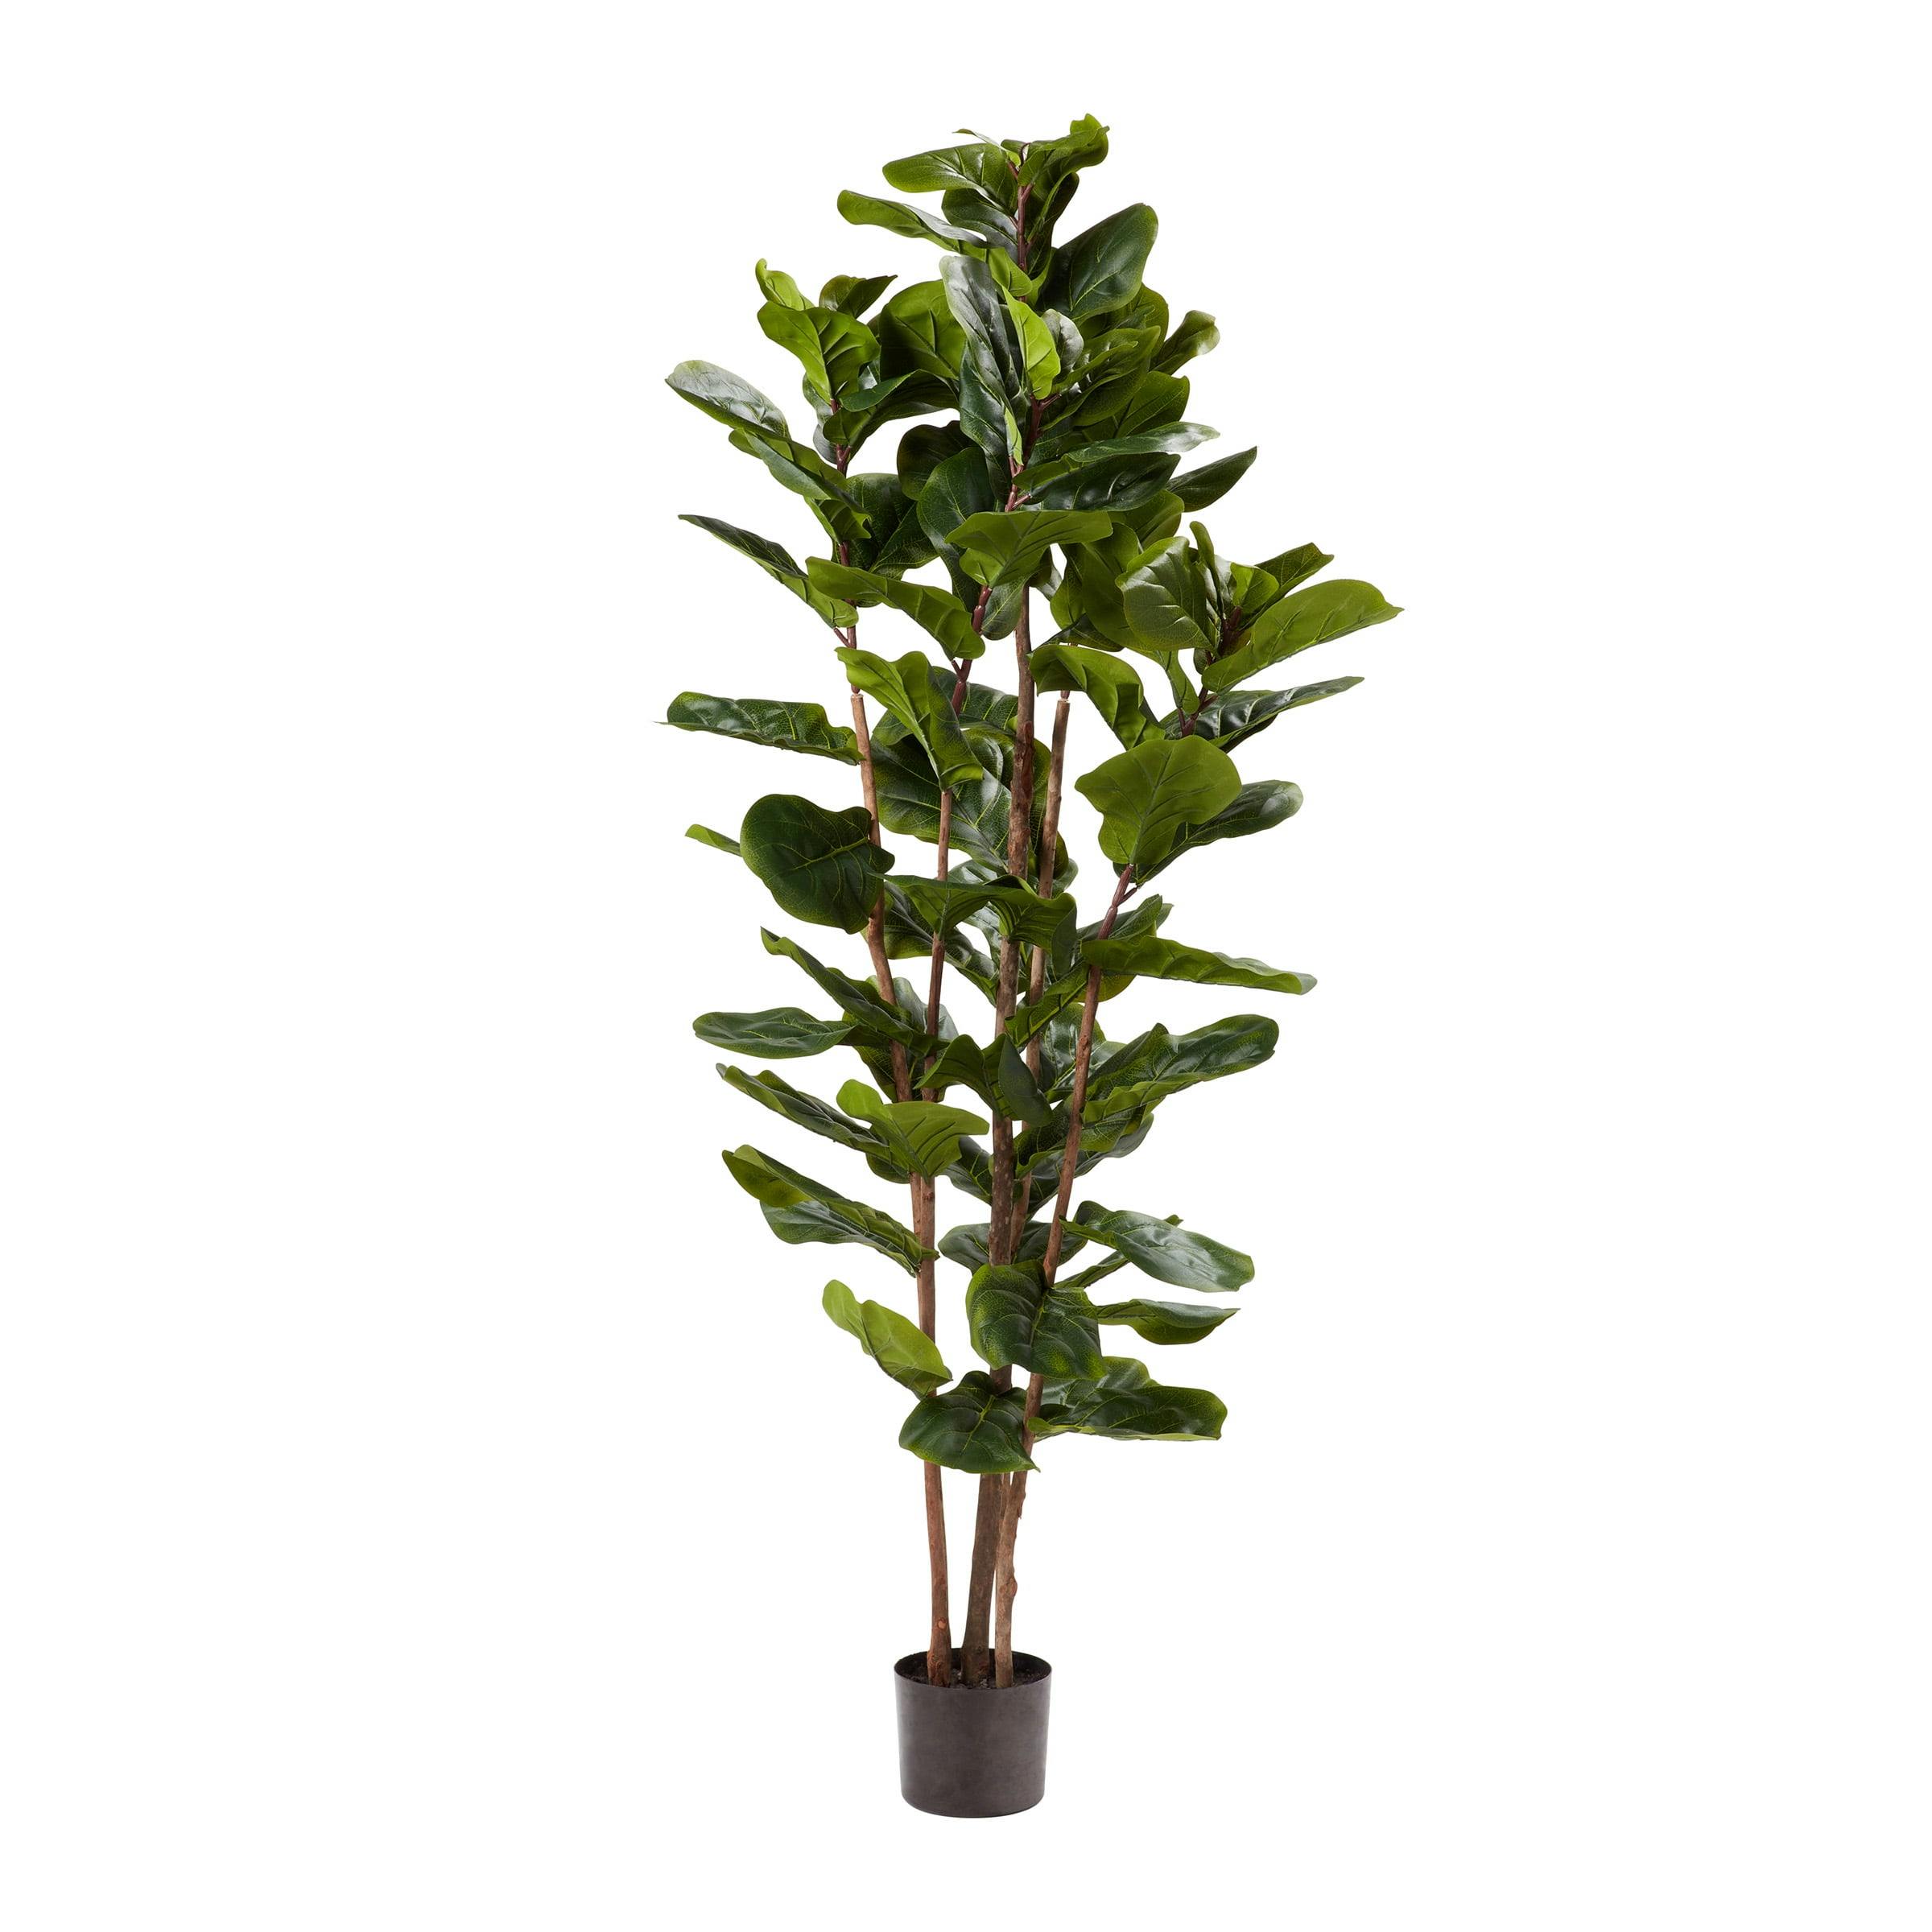 Lush Green 72" Fiddle Leaf Fig Topiary with Lights in Black Plastic Pot